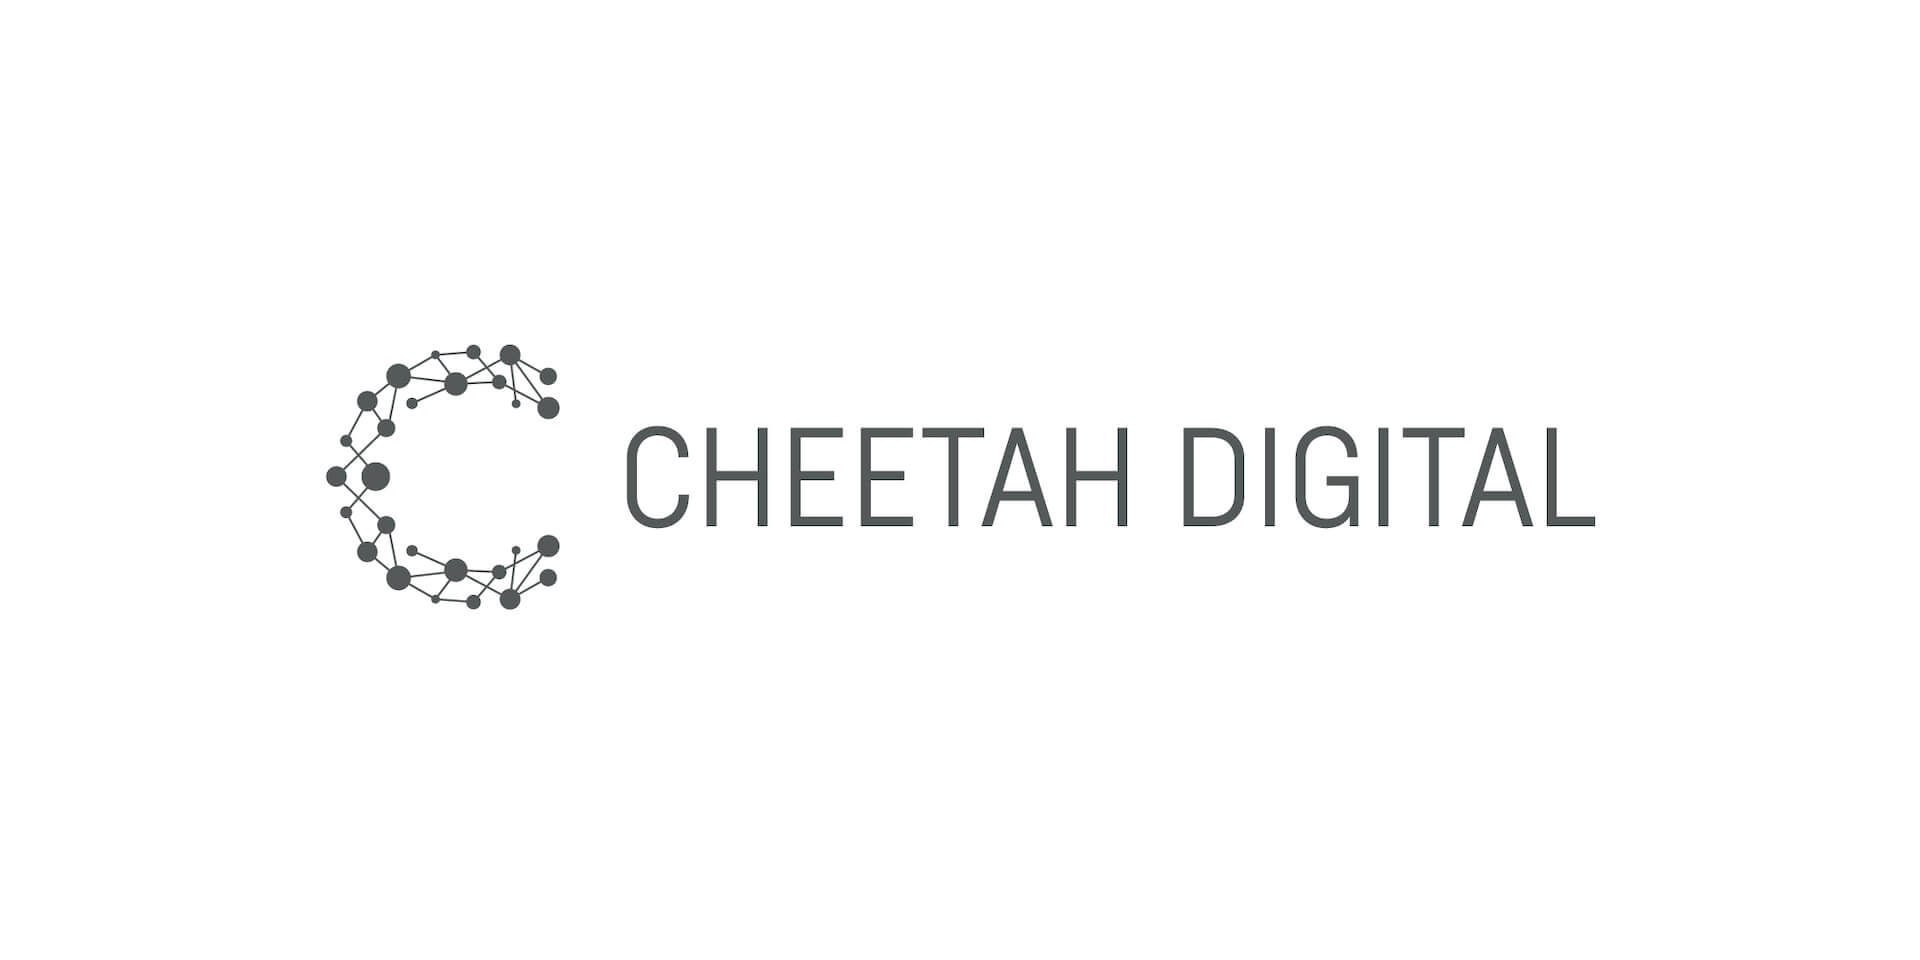 Cheetah Digital's acquisition of Wayin Inc. aims to bring first-and 'zero-party' data to marketers